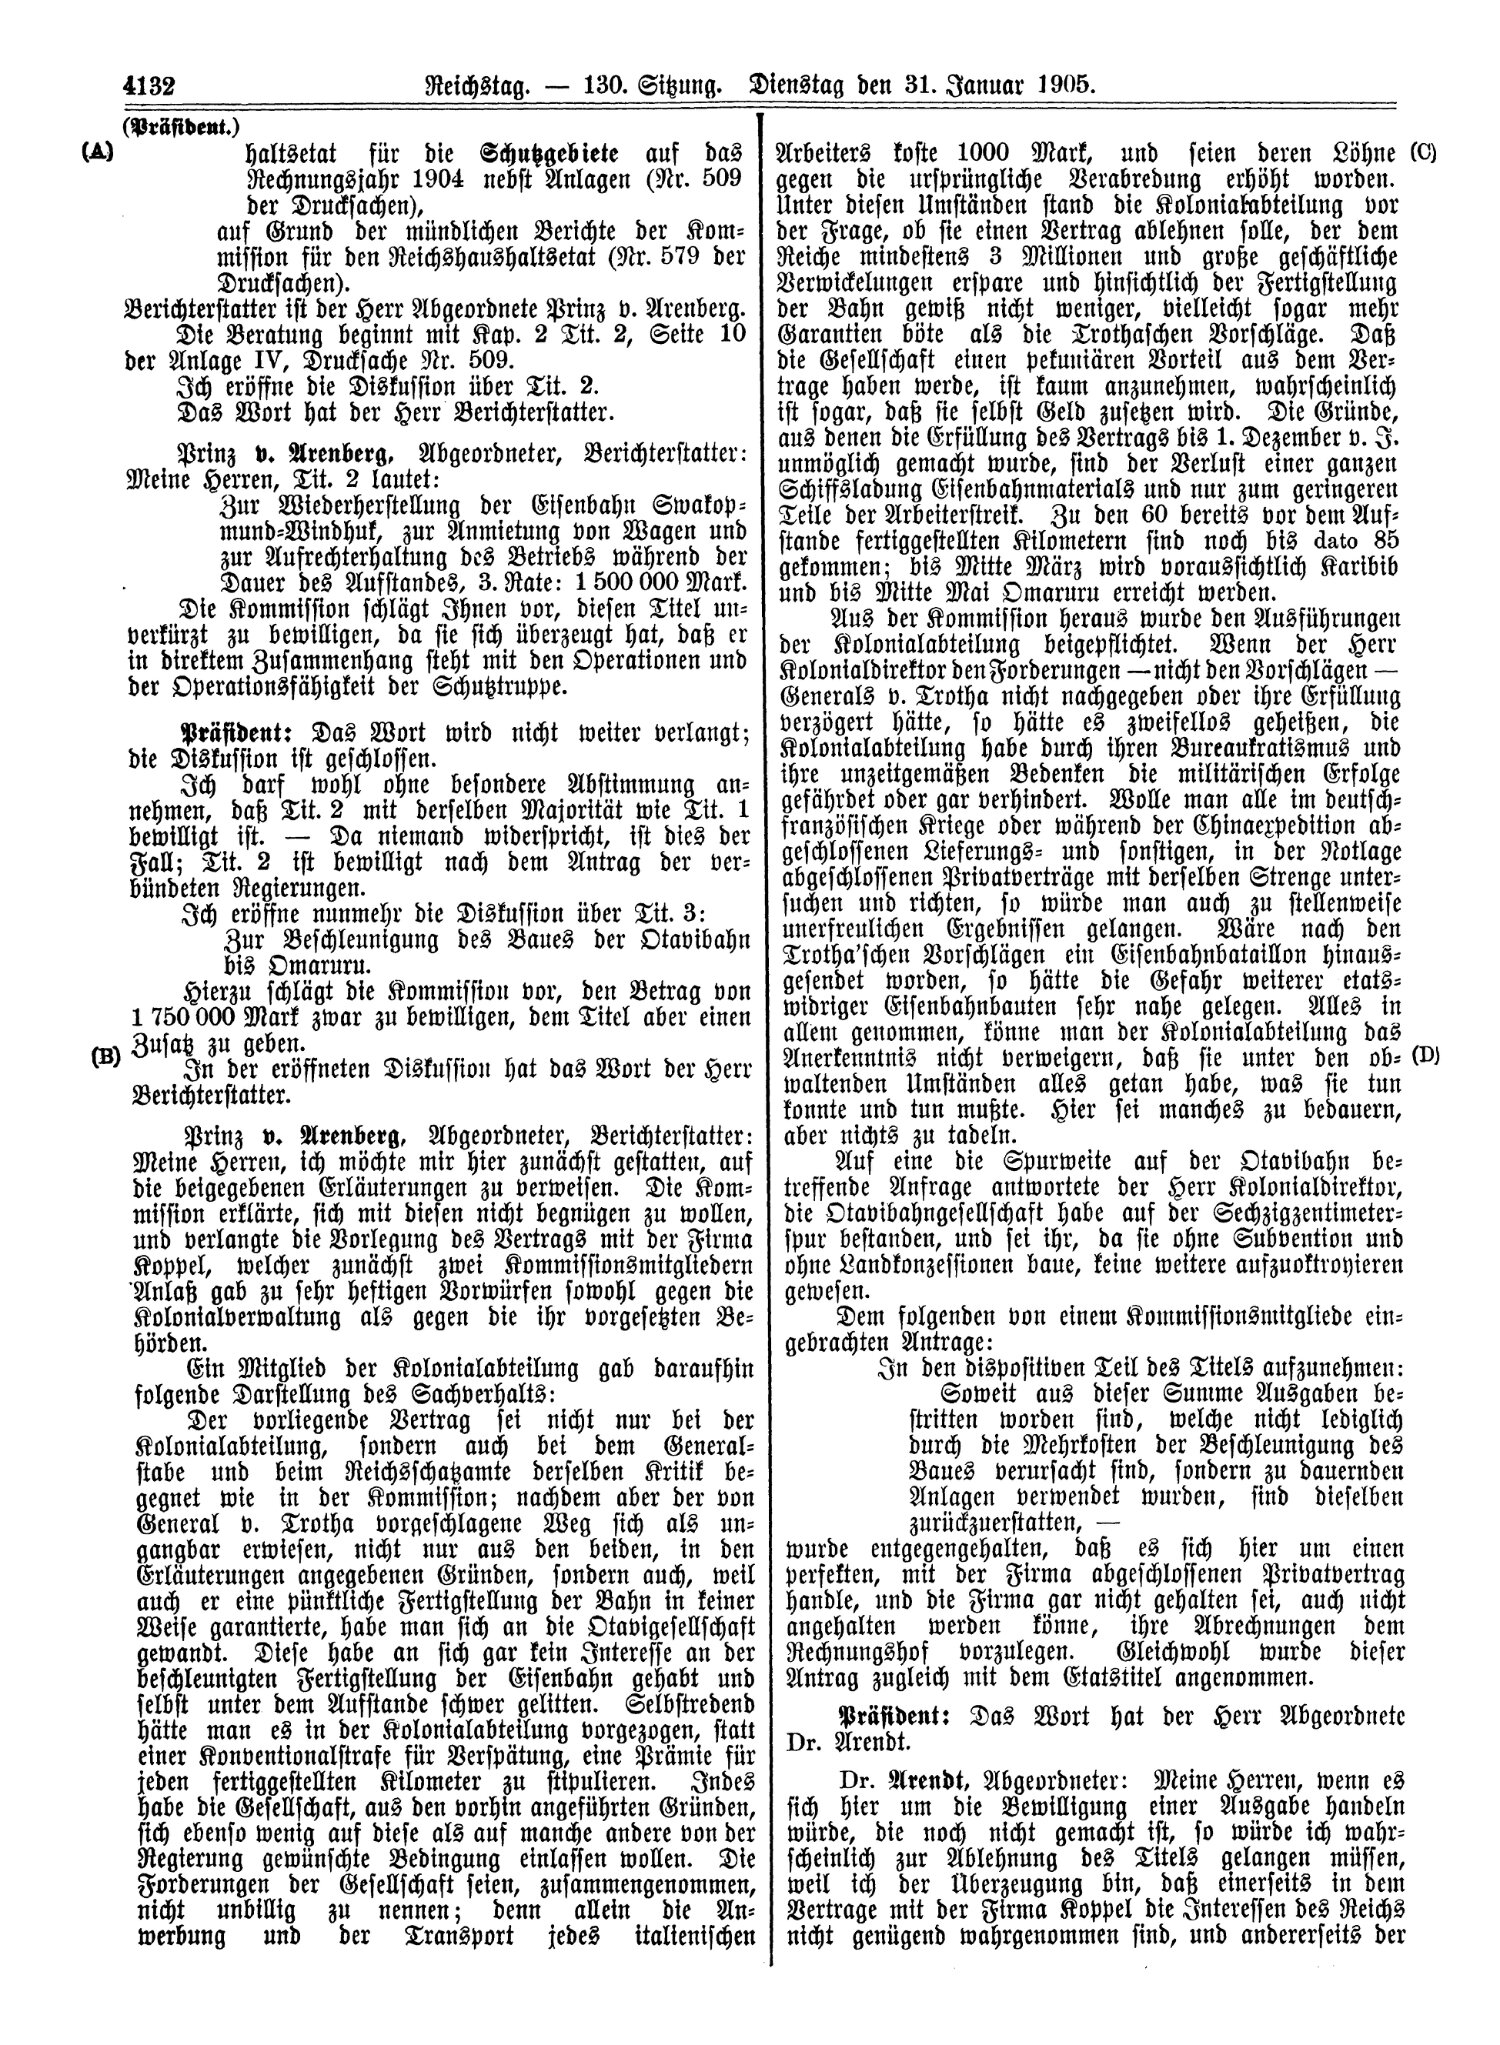 Scan of page 4132